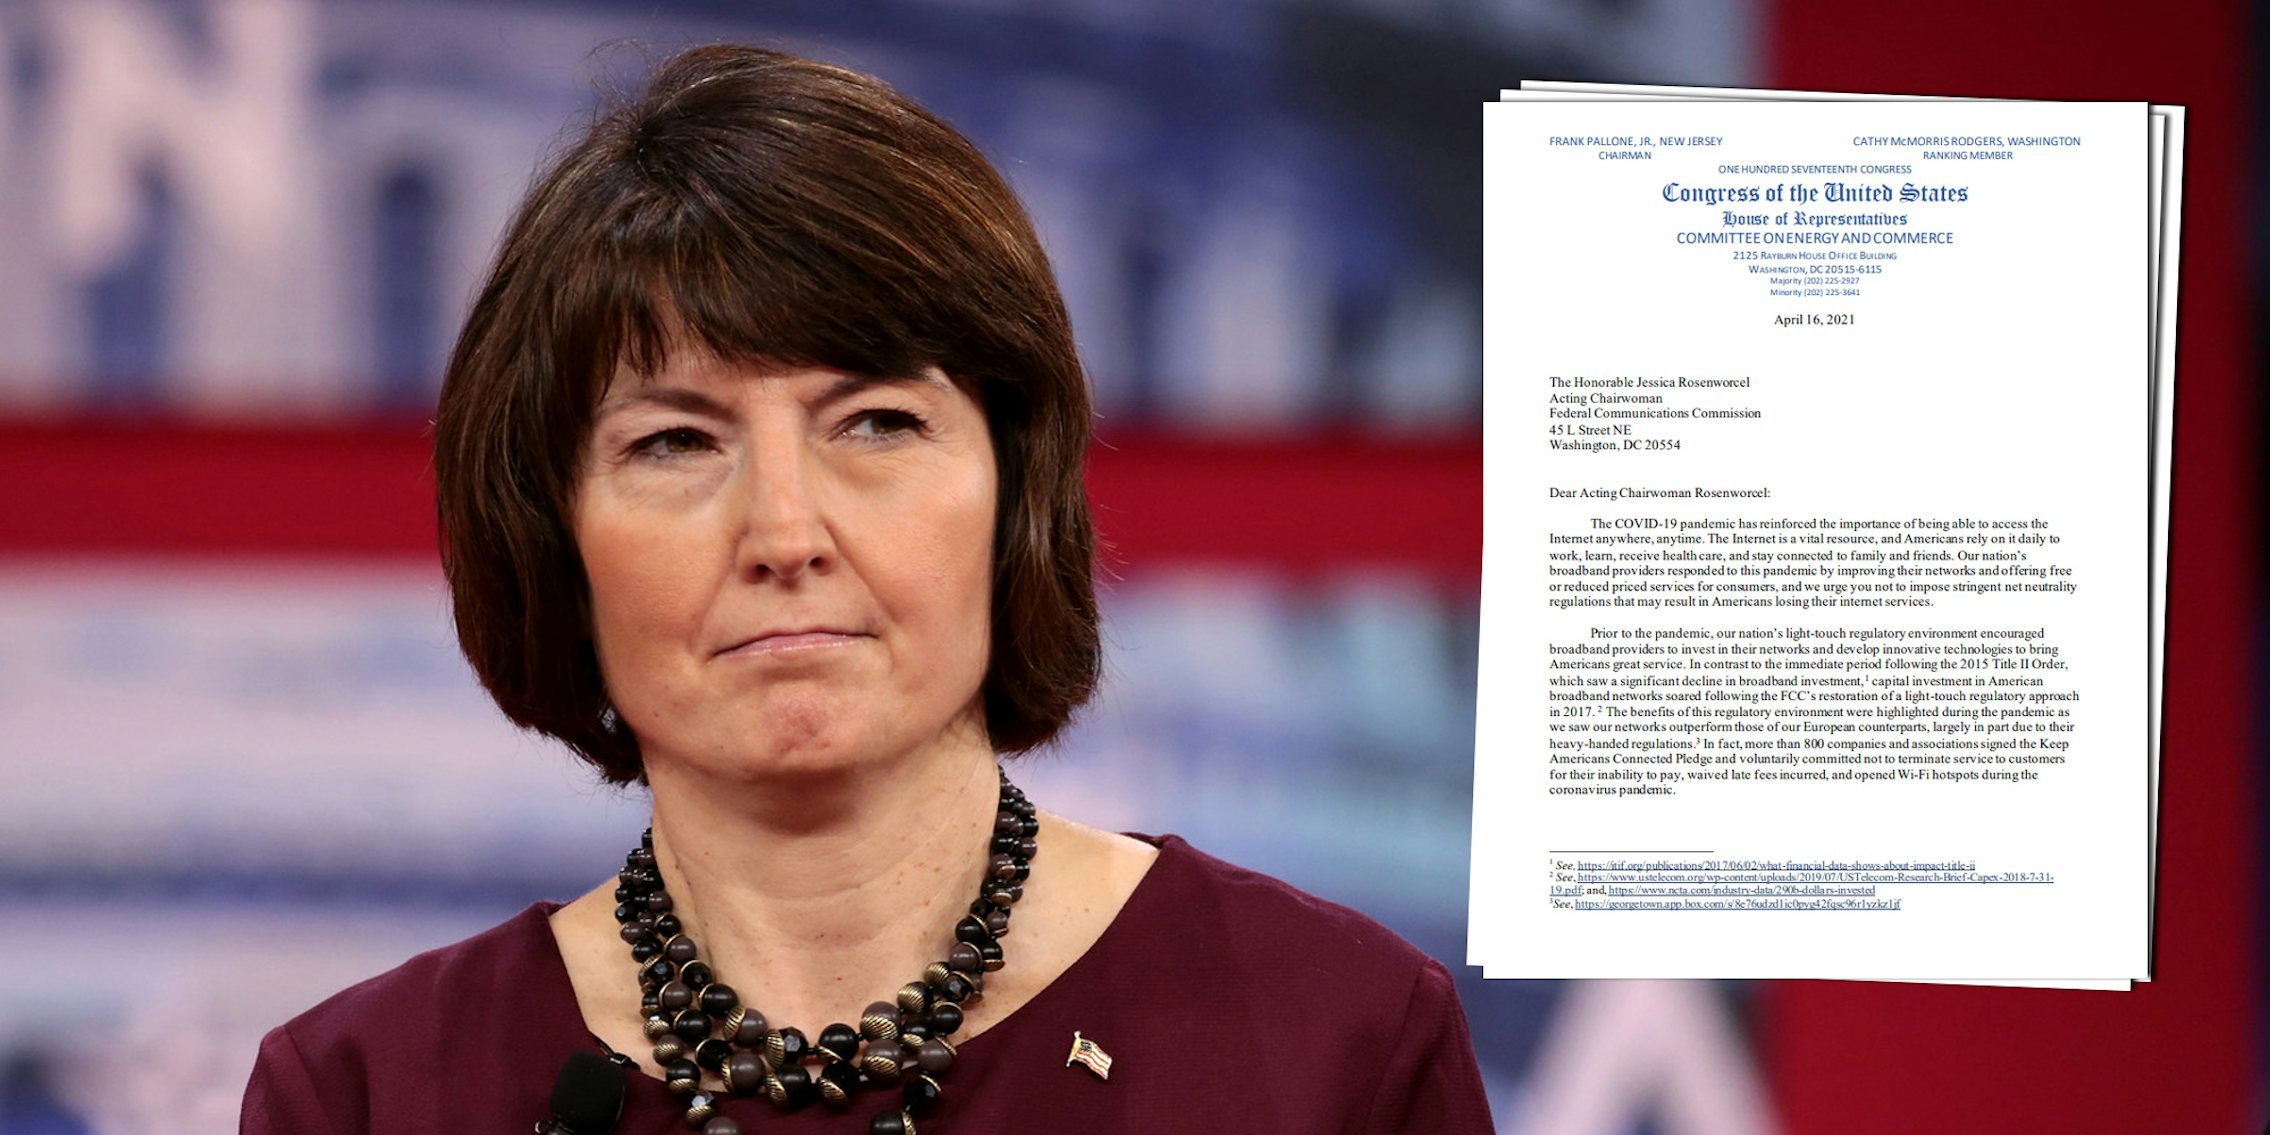 Rep. Cathy McMorris-Rodgers next to a letter sent by House Republicans to Acting FCC Chair Jessica Rosenworcel arguing against restoring net neutrality rules.